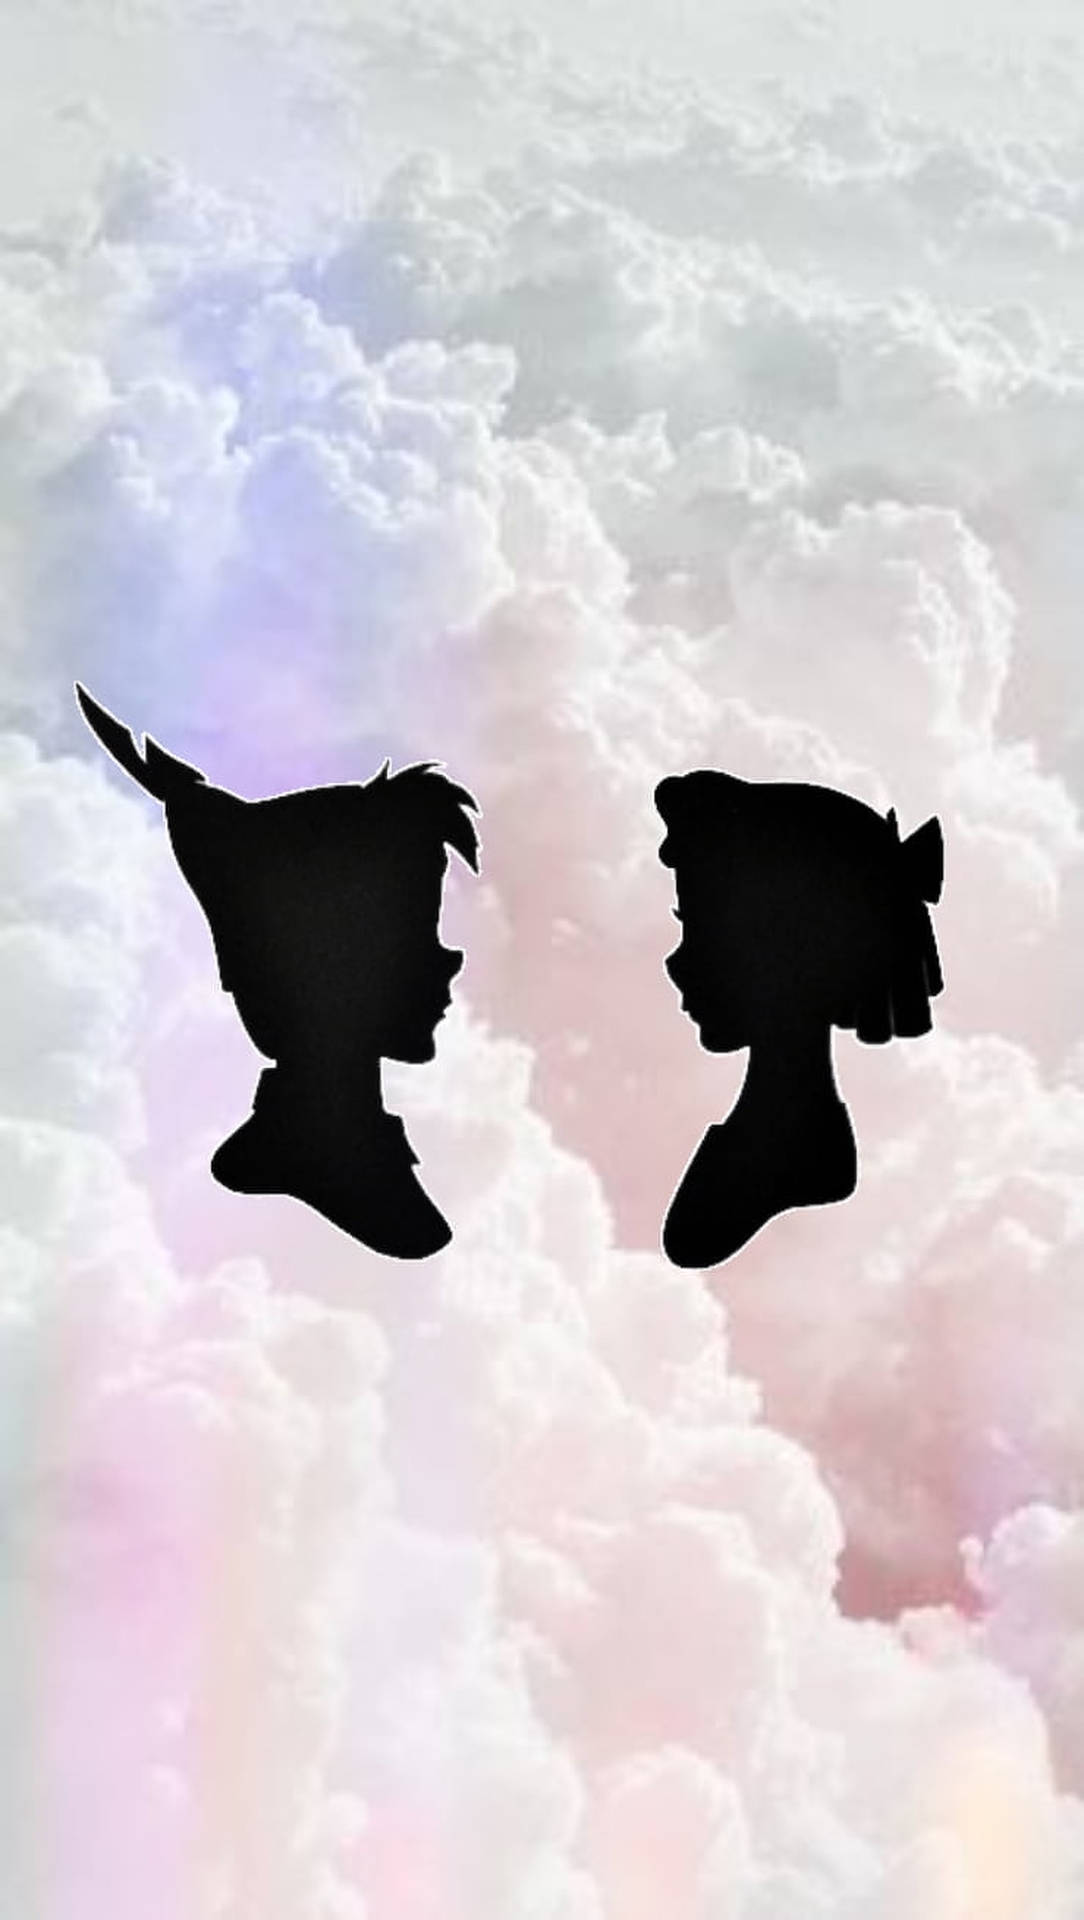 Peter Pan And Wendy Silhouette Background